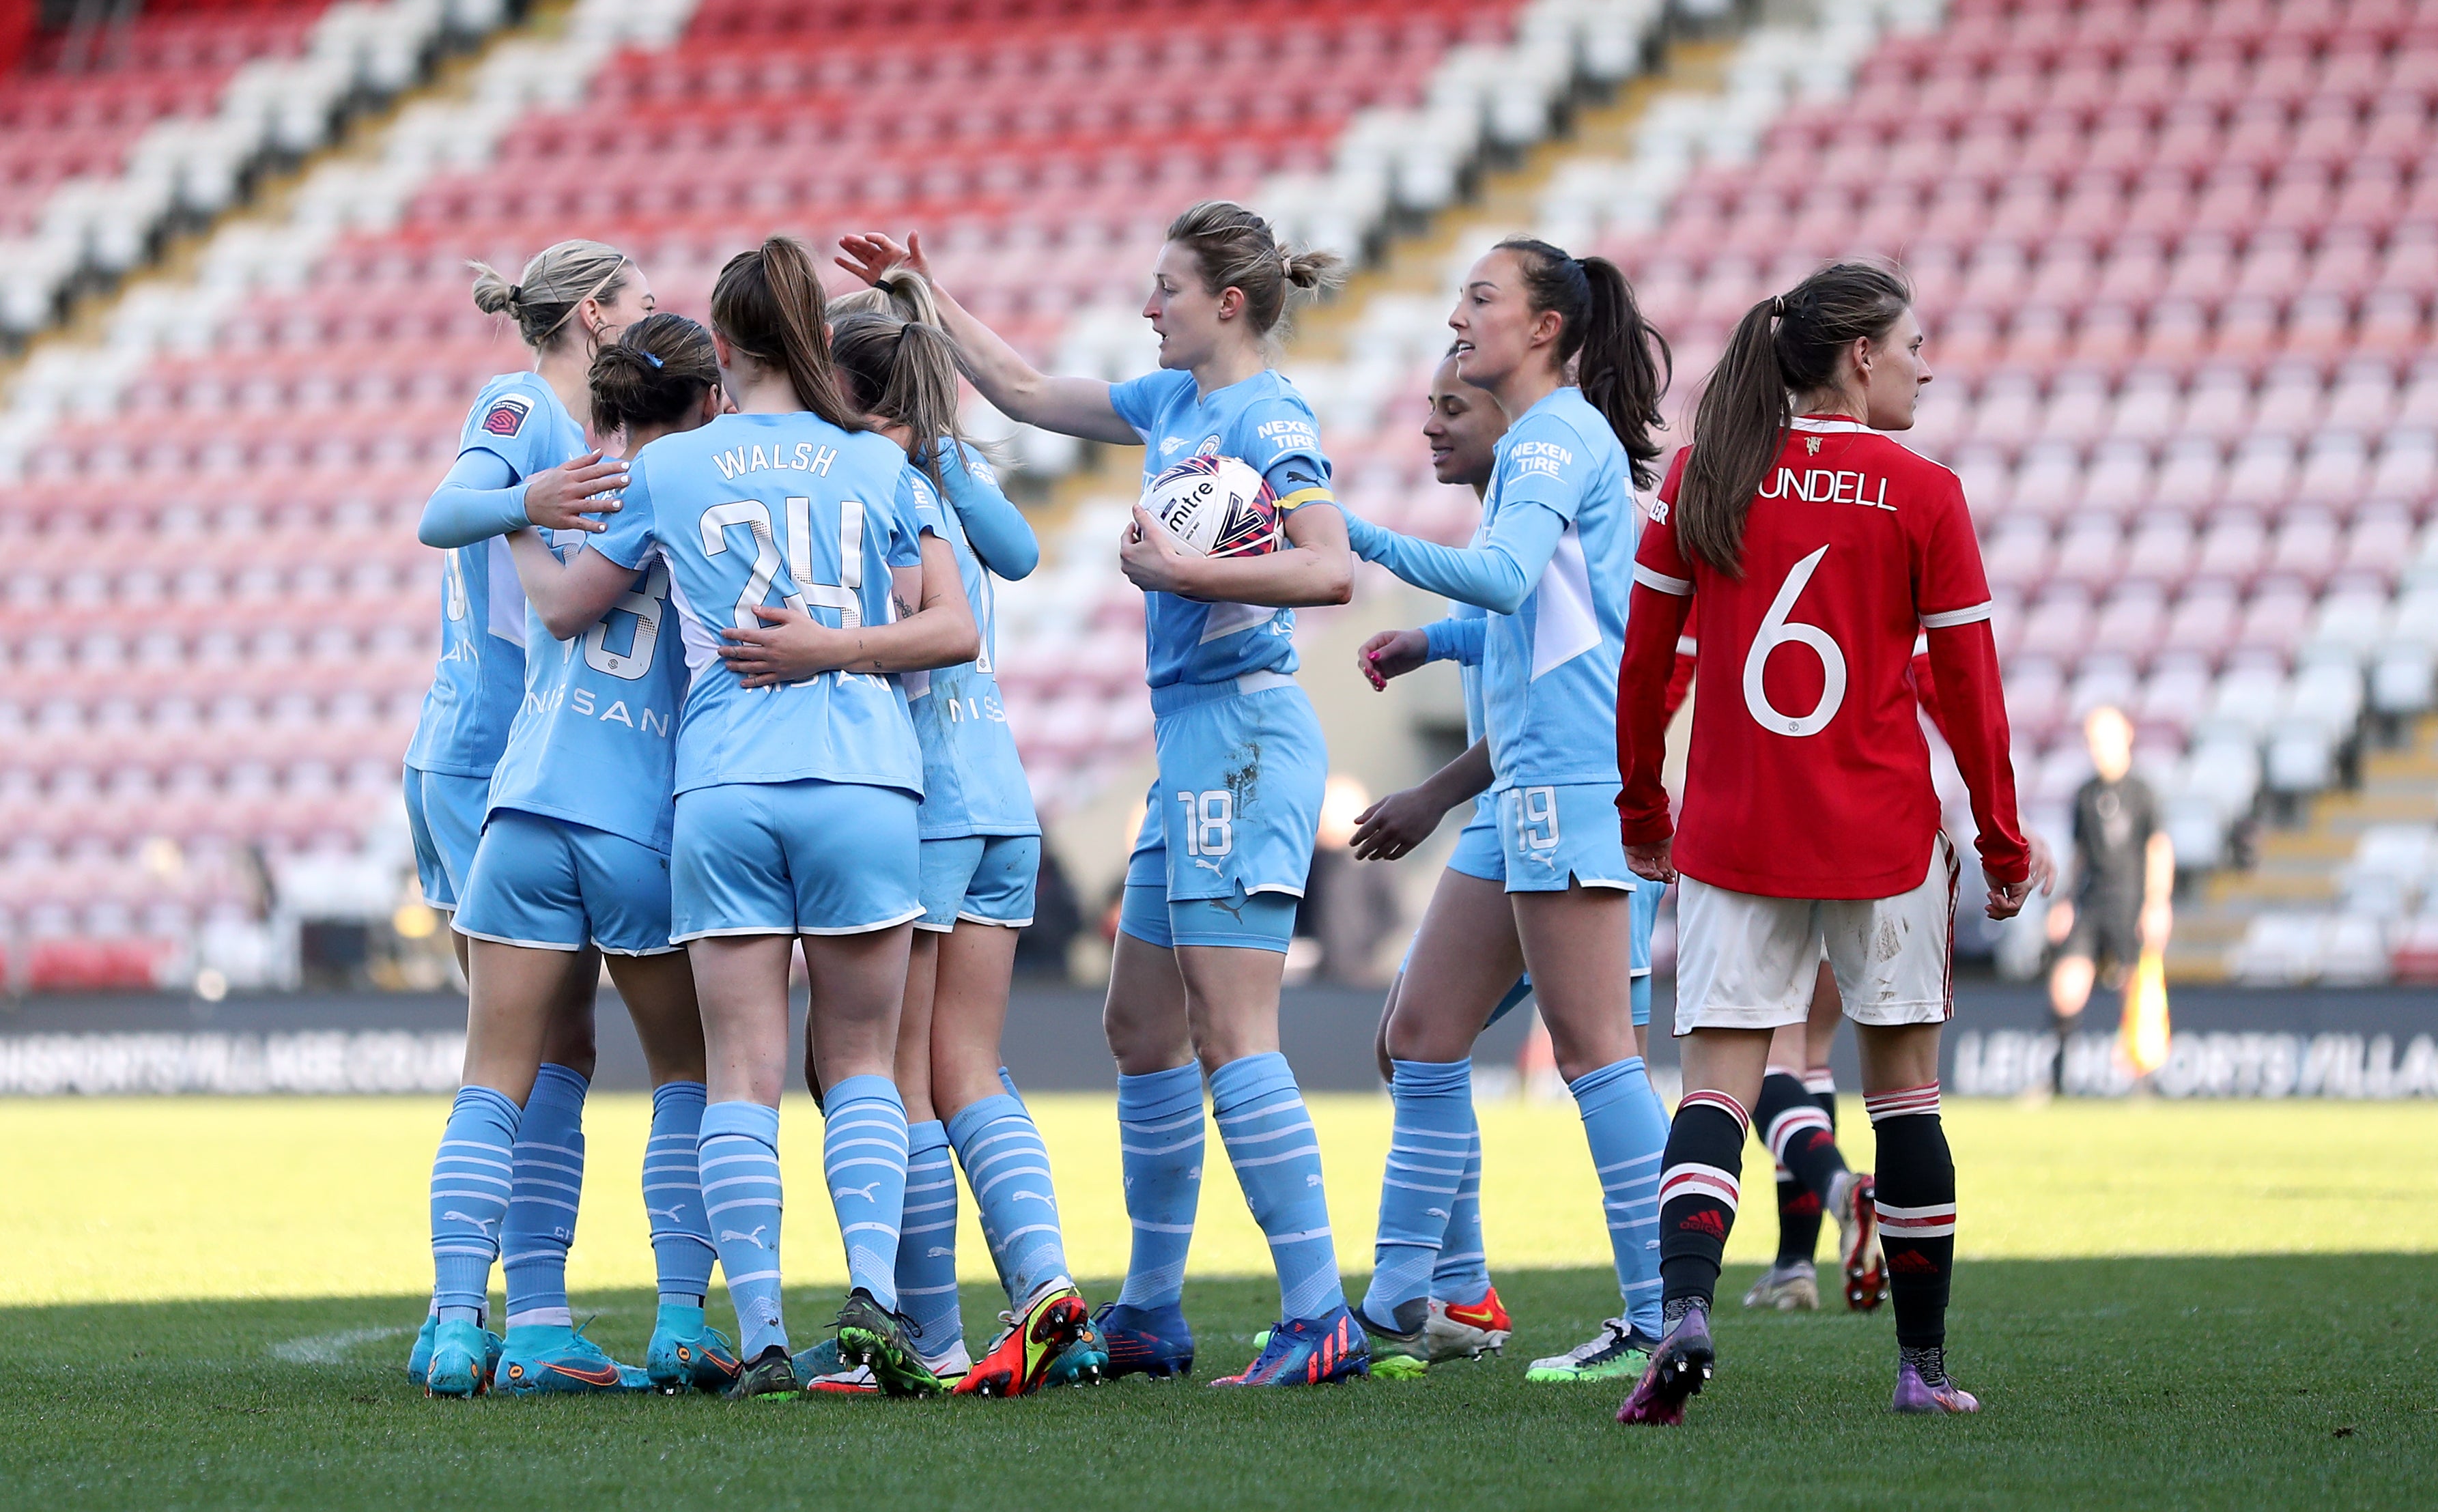 Manchester City eased into the quarter-finals of the Women’s FA Cup with a 4-1 win over rivals United